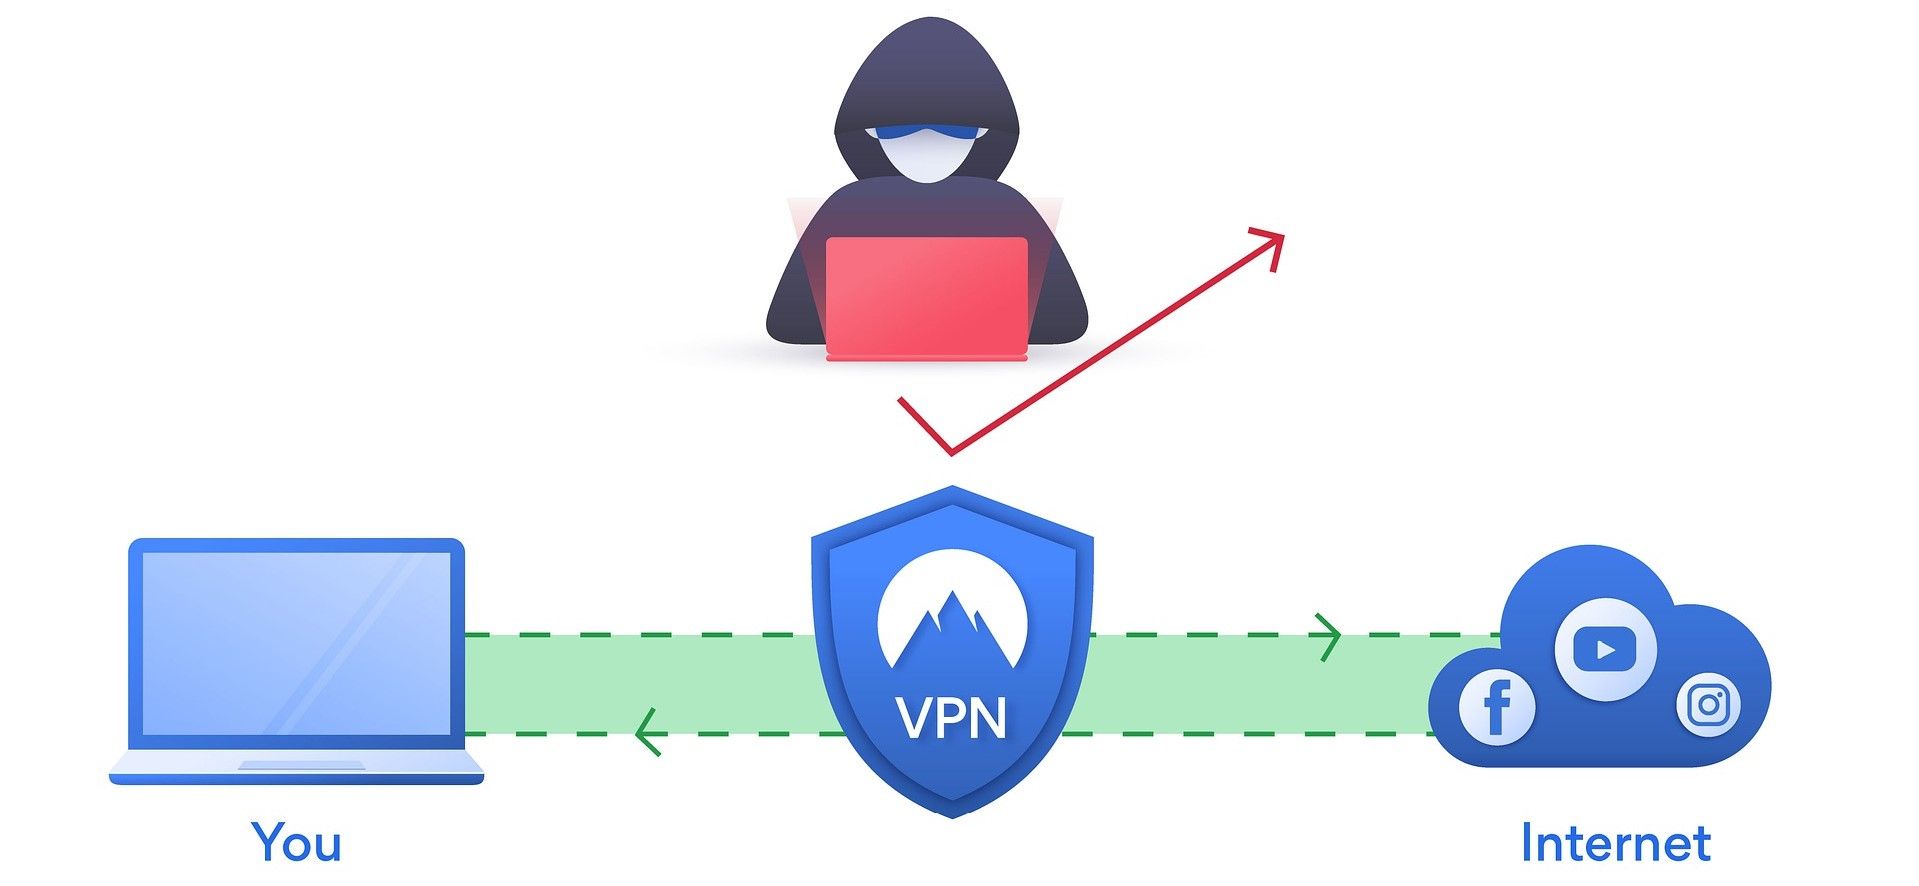 A cartoonish figure wearing a hood symbolizing security cannot access the user's internet traffic because it is encrypted by a VPN. The image shows a VPN icon placed between the user's device and the internet.